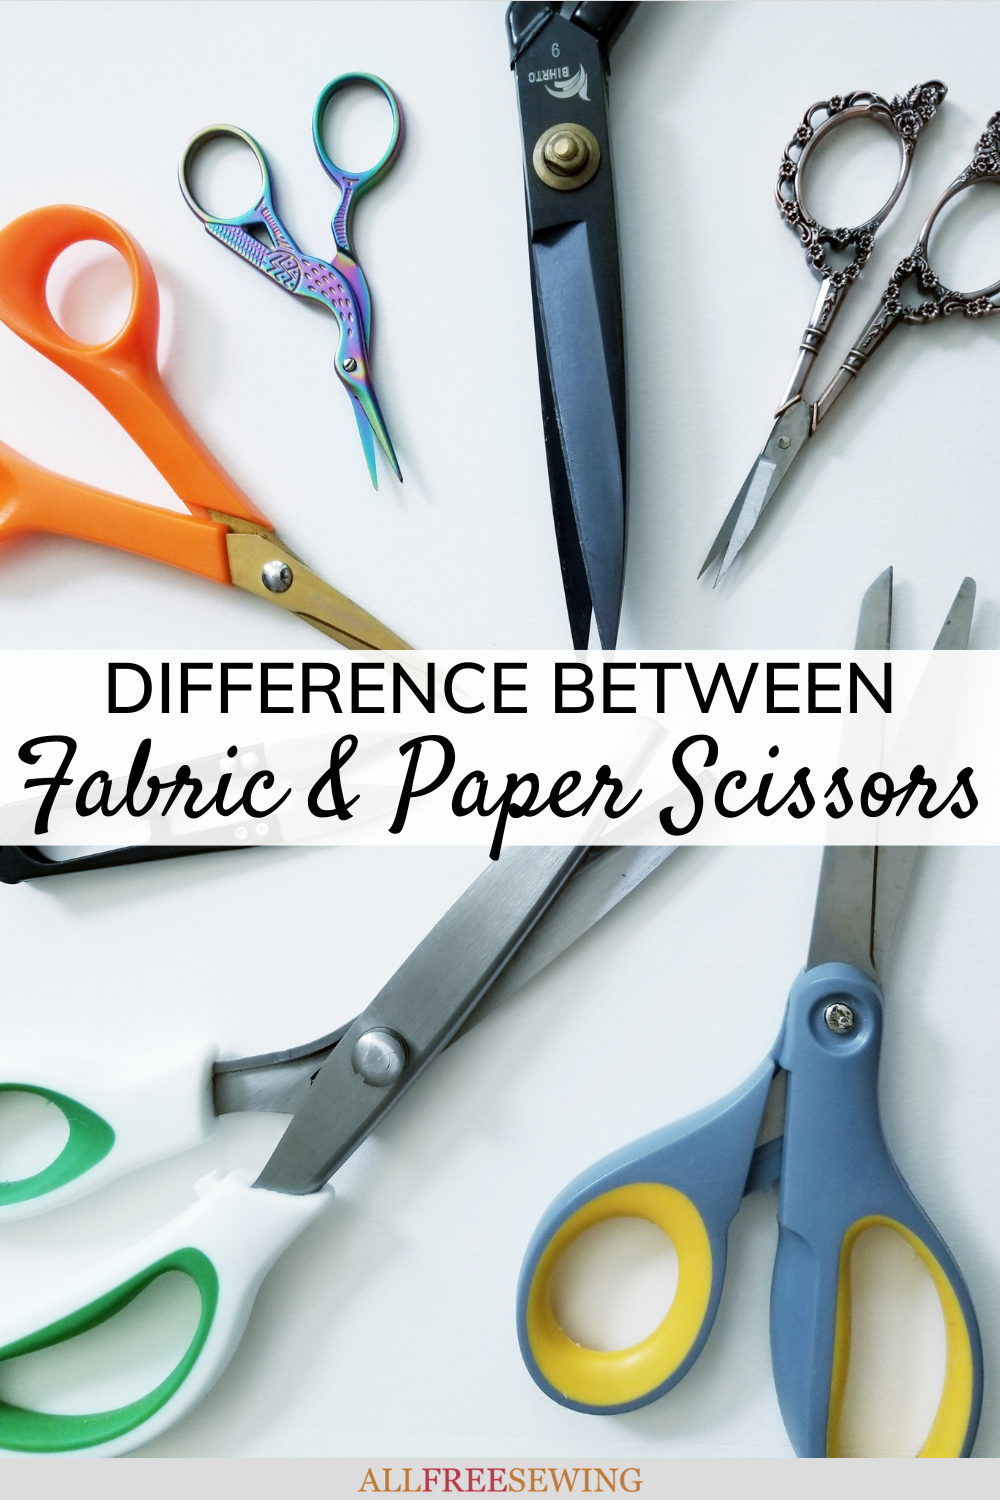 What's the Difference Between Fabric Scissors and Paper Scissors?